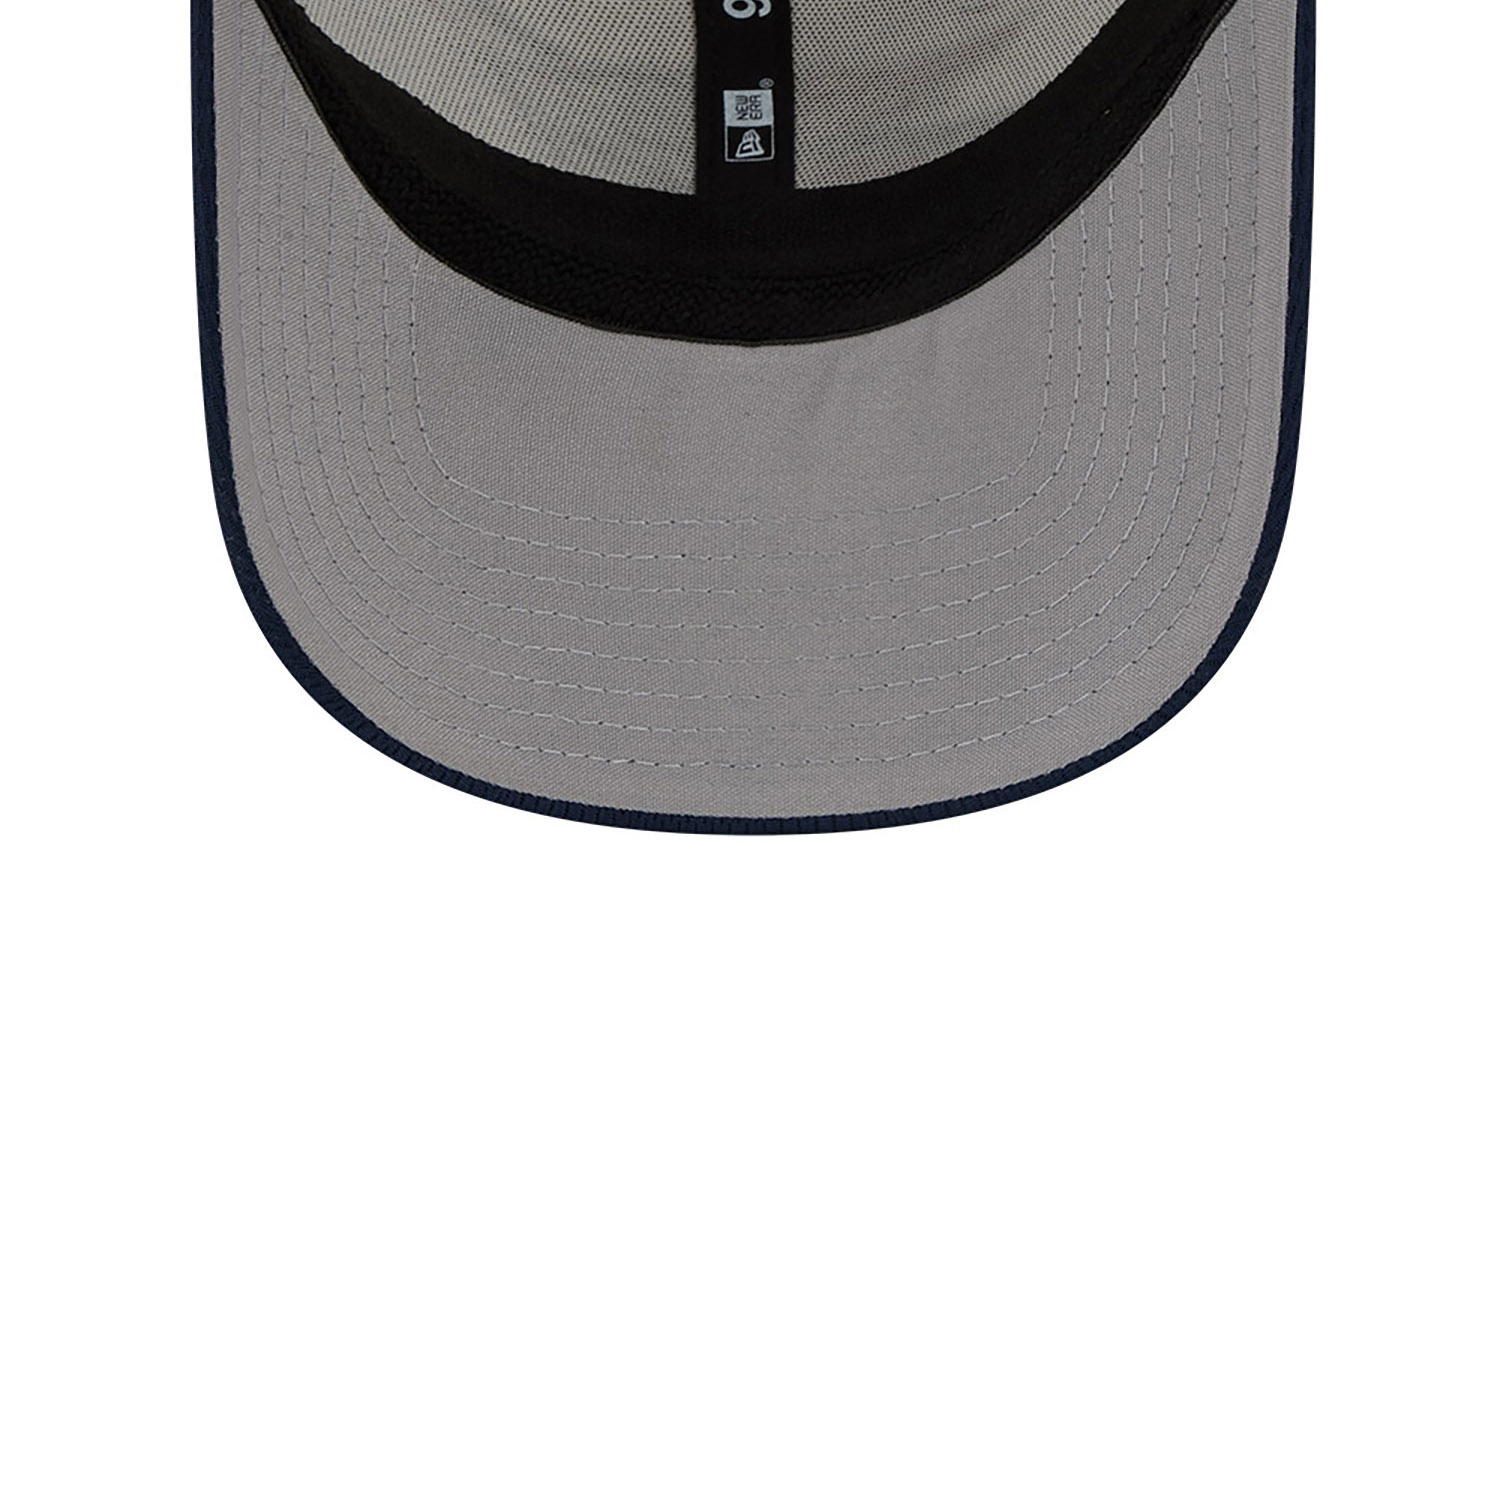 New England Patriots NFL Sideline 2023 White 9FORTY Stretch Snap Cap